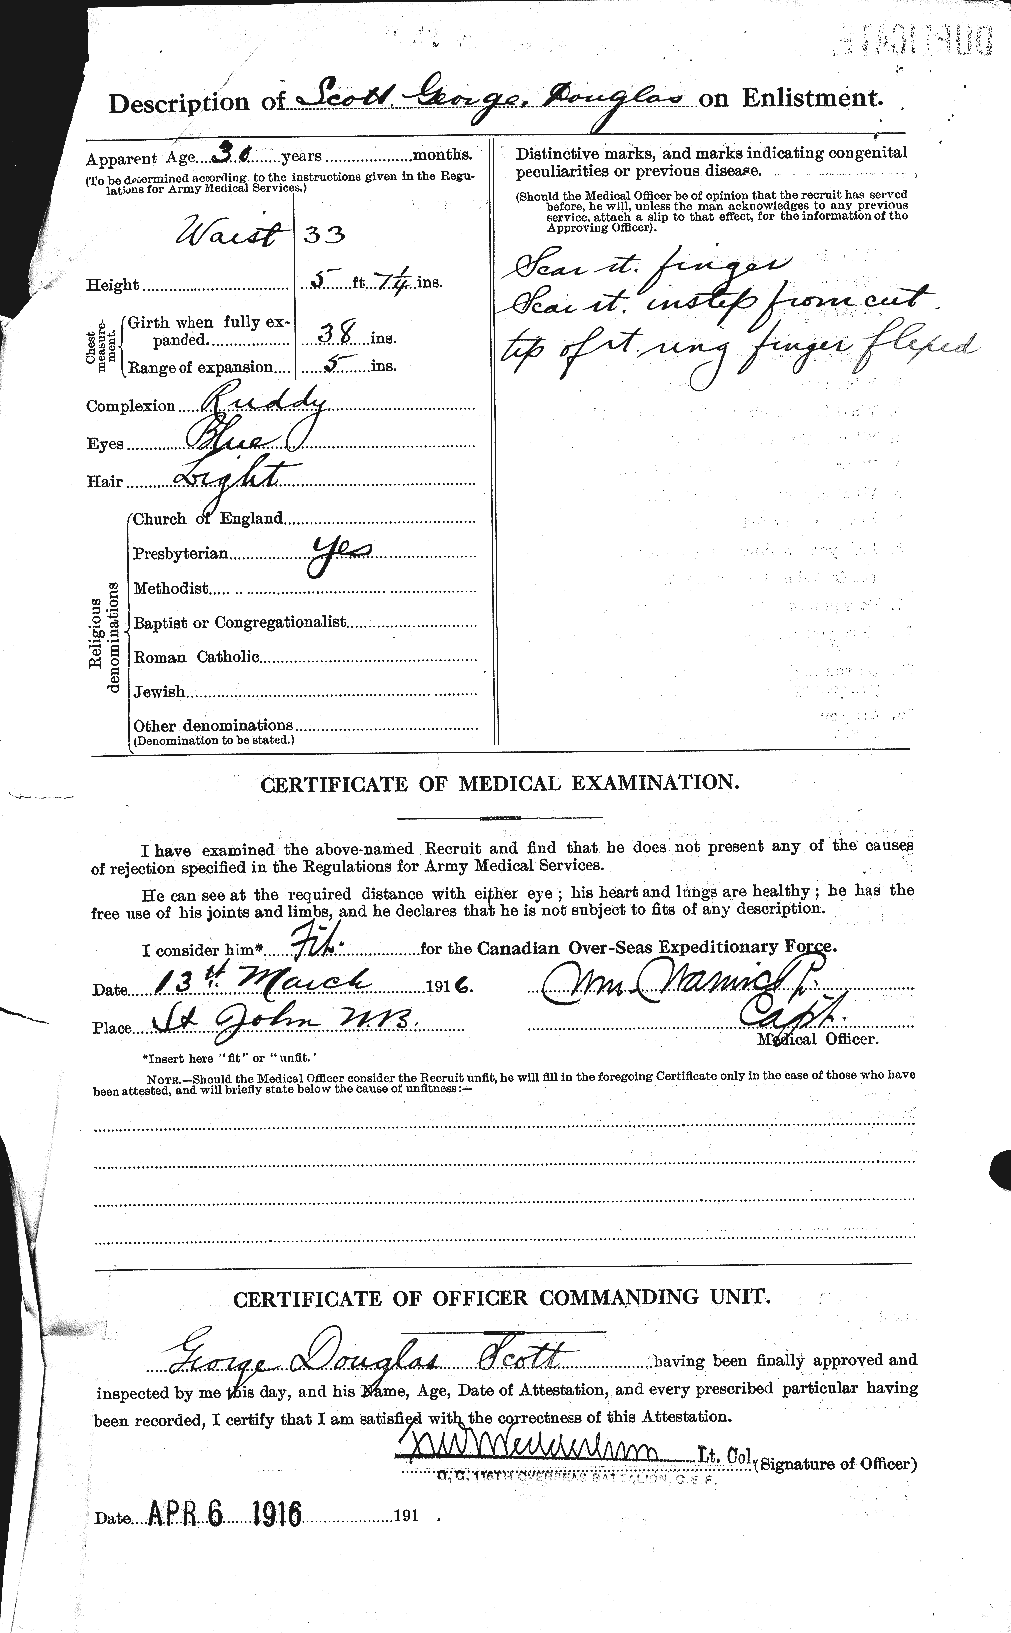 Personnel Records of the First World War - CEF 083561b